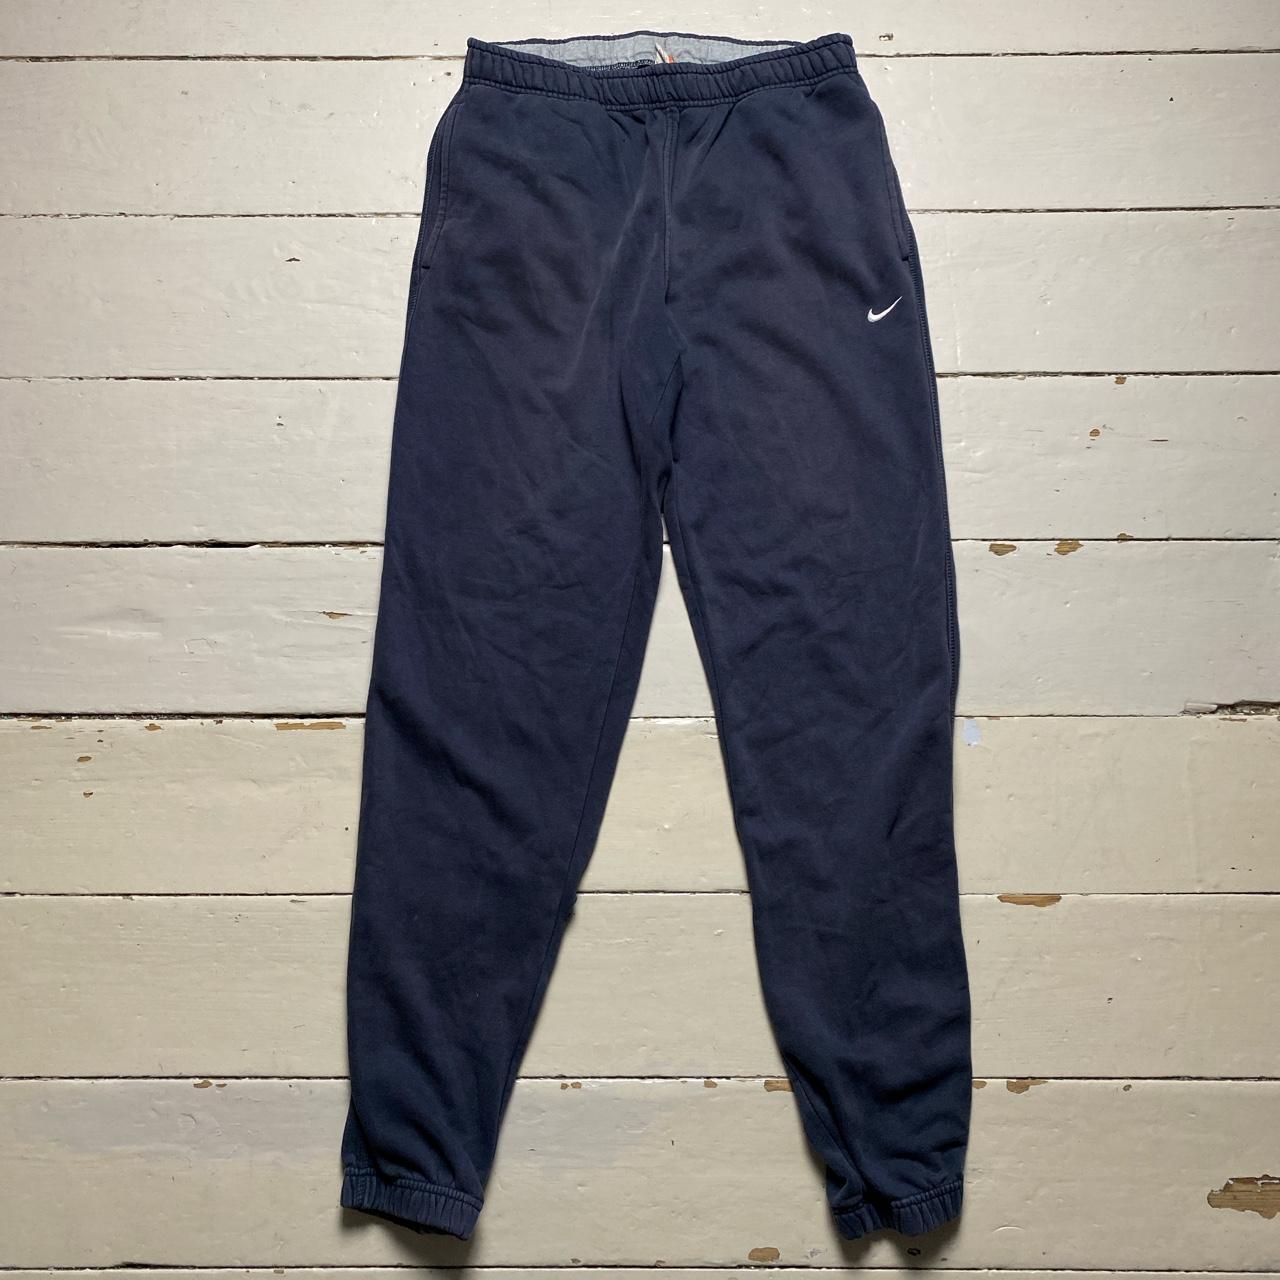 Nike Athletic Department Swoosh Navy and White Joggers